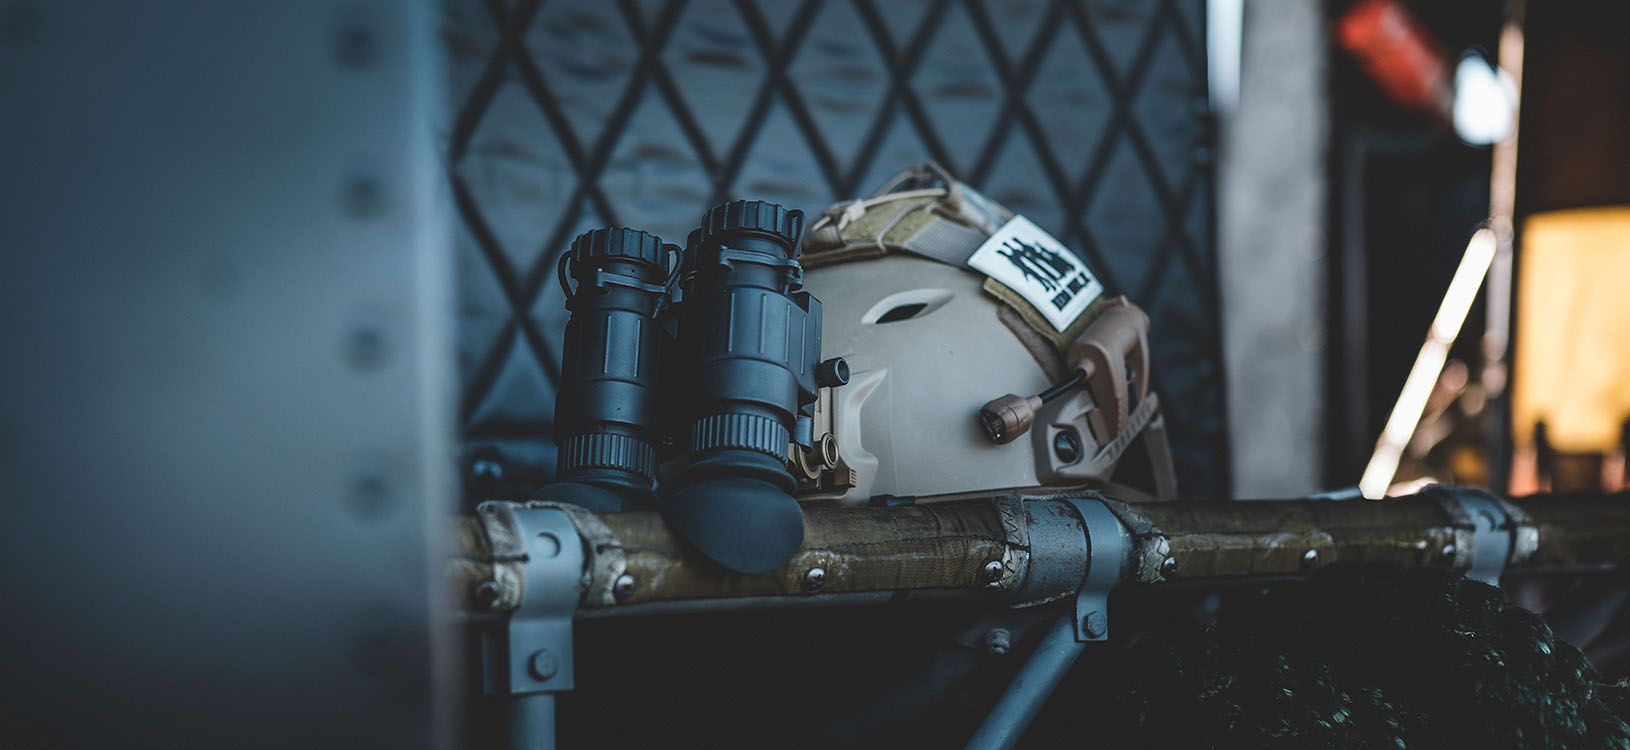 How to take care of night vision equipment